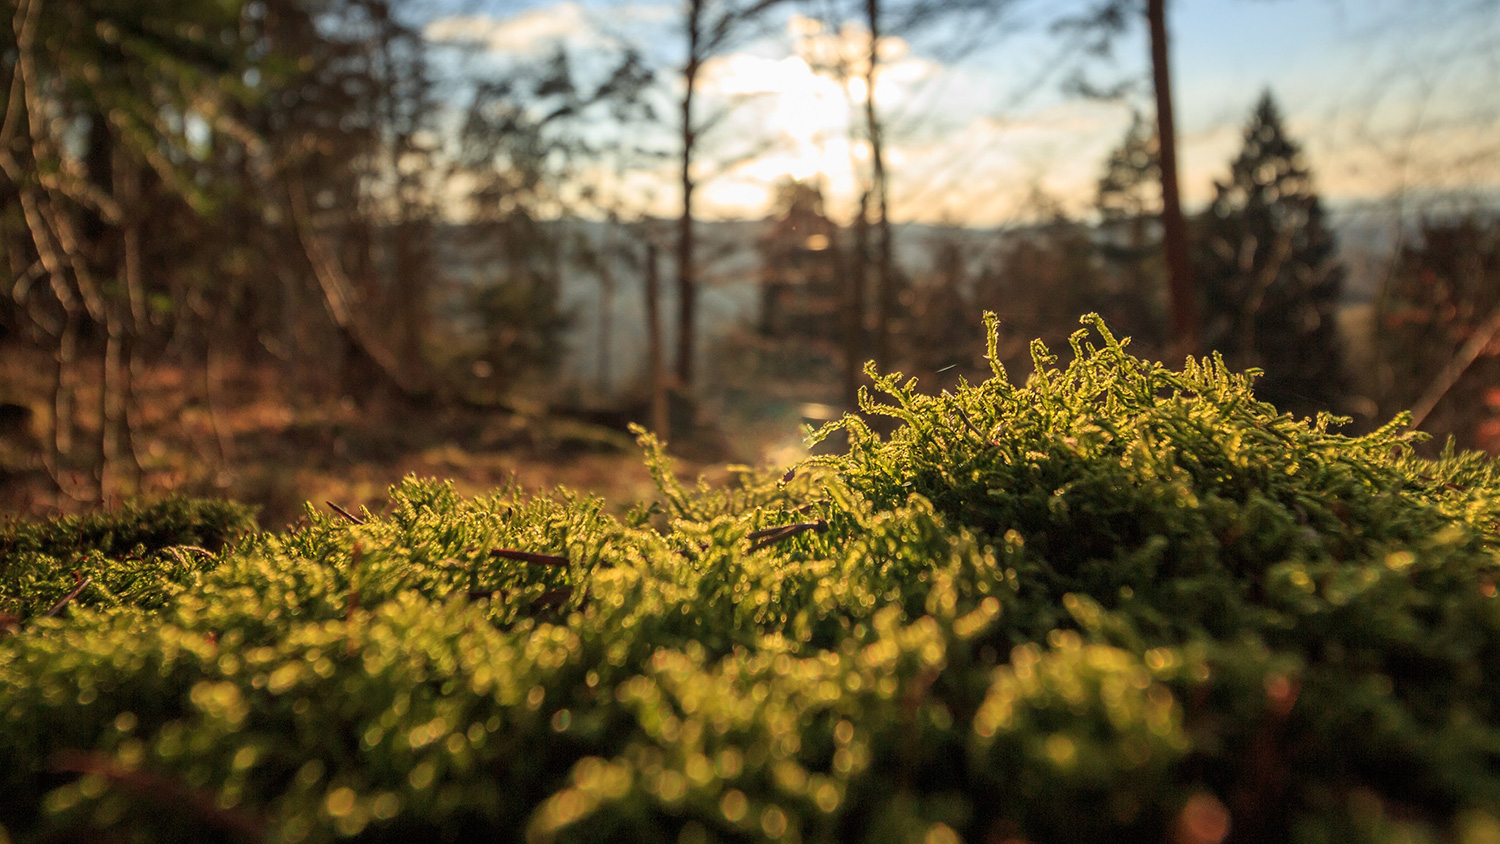 Moss and grass in a forest